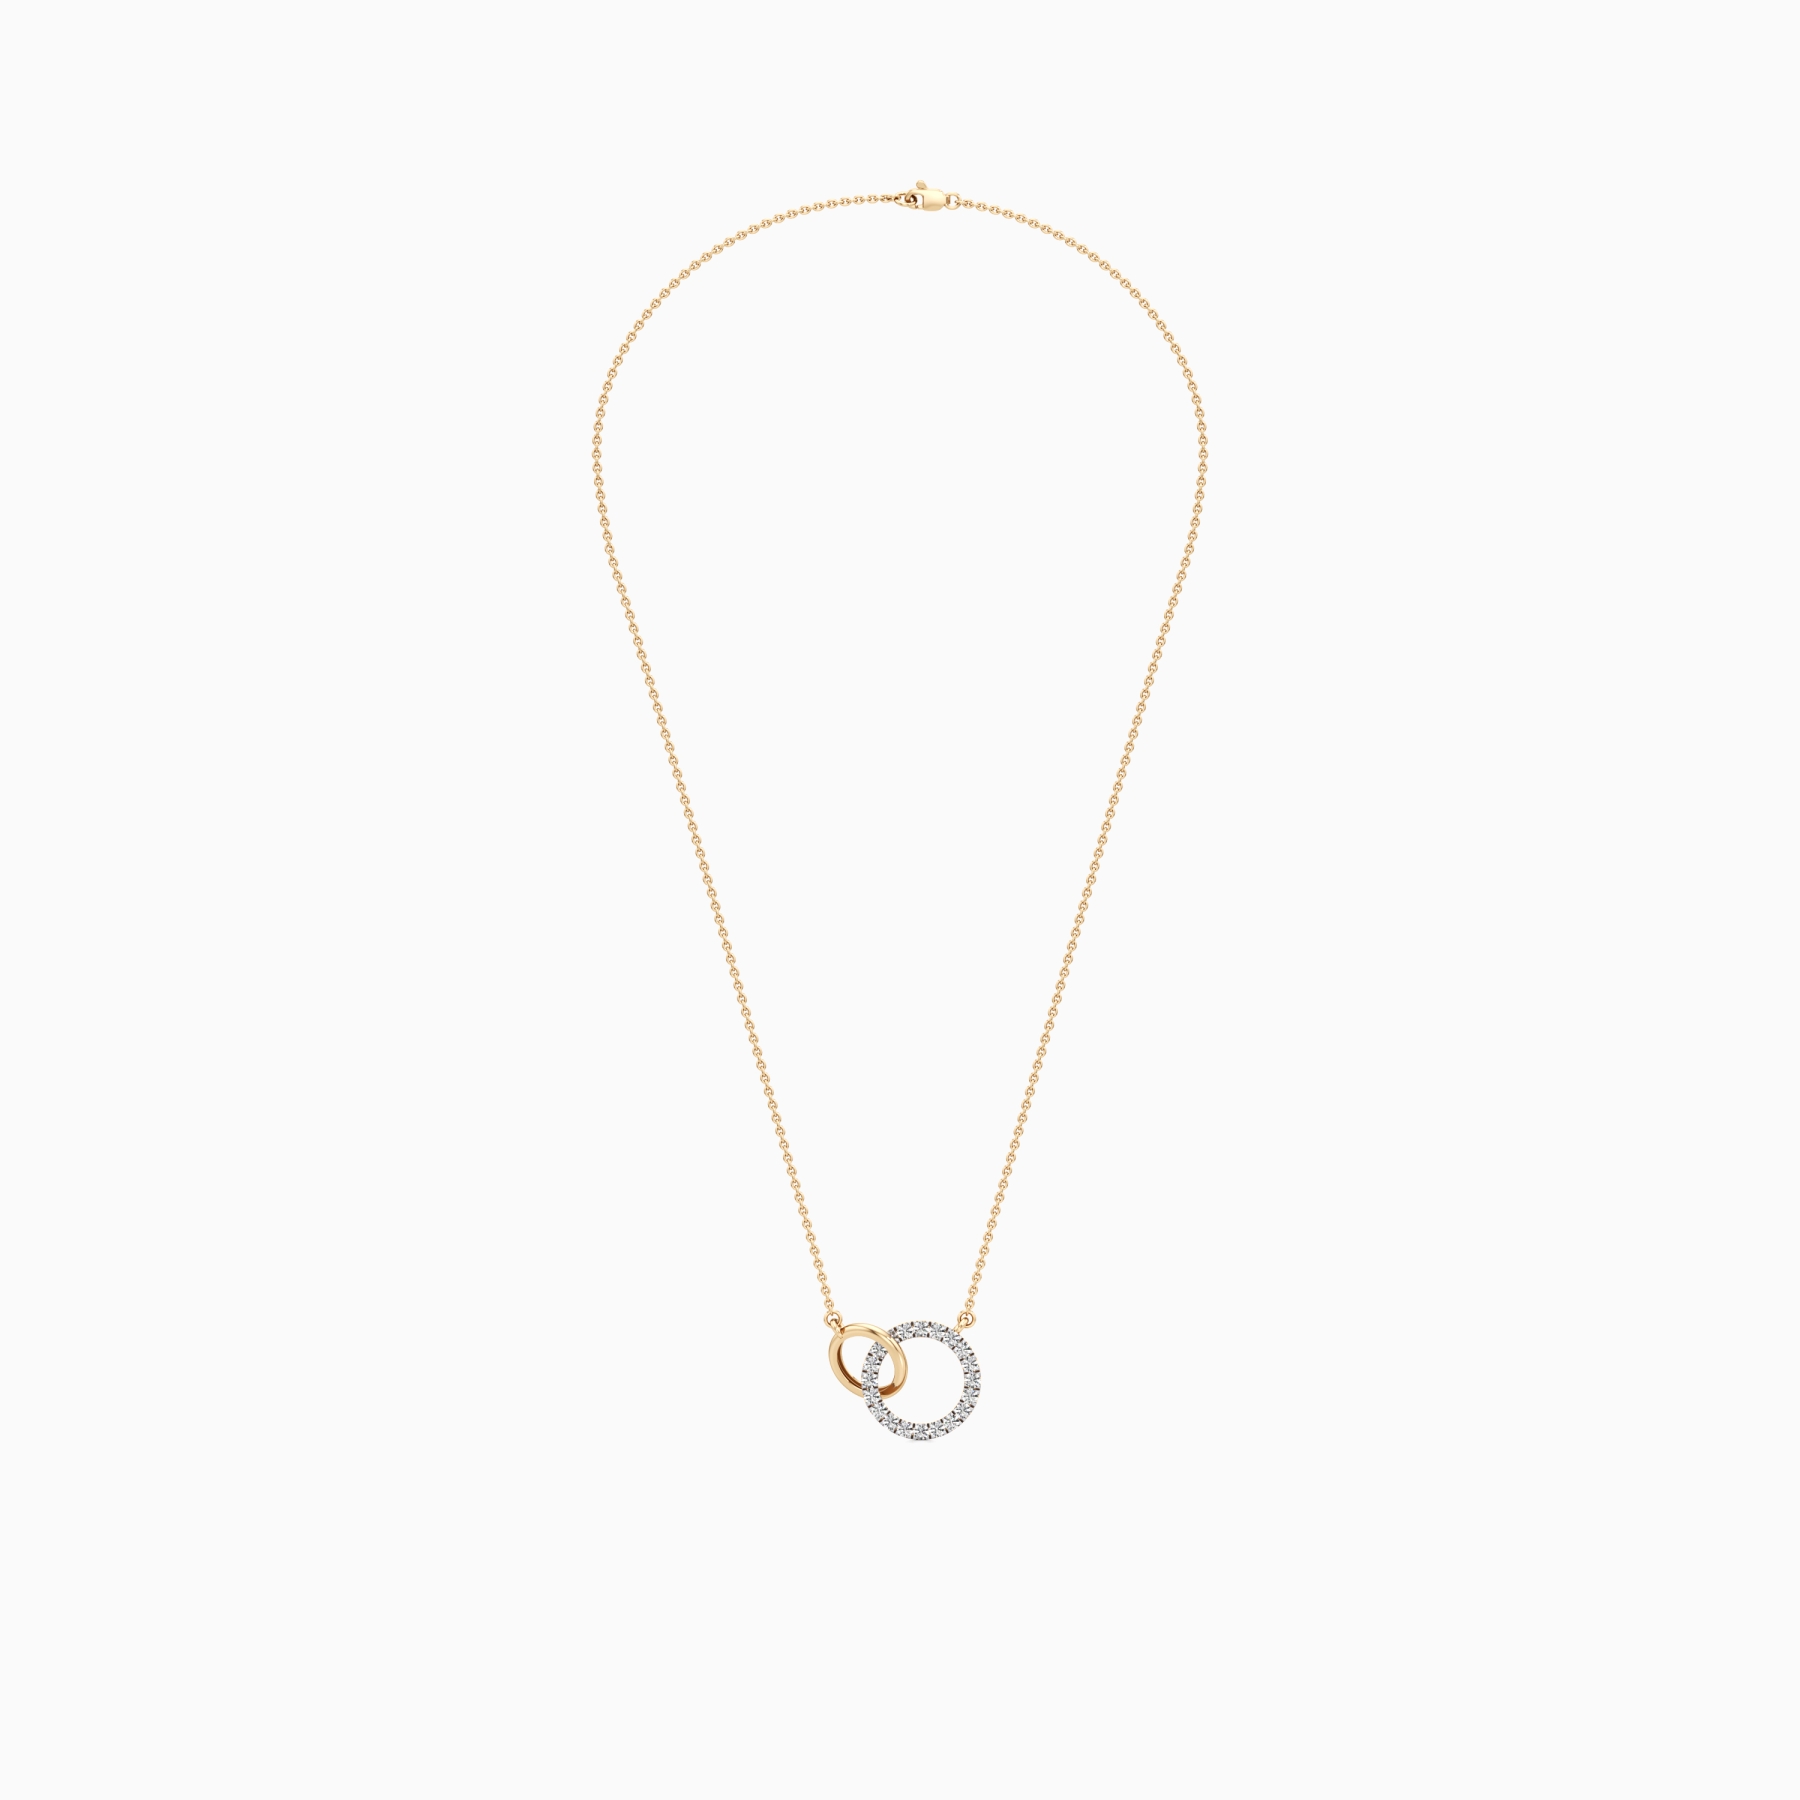 Interlinked Circles Love Pendant in Yellow 14K Gold